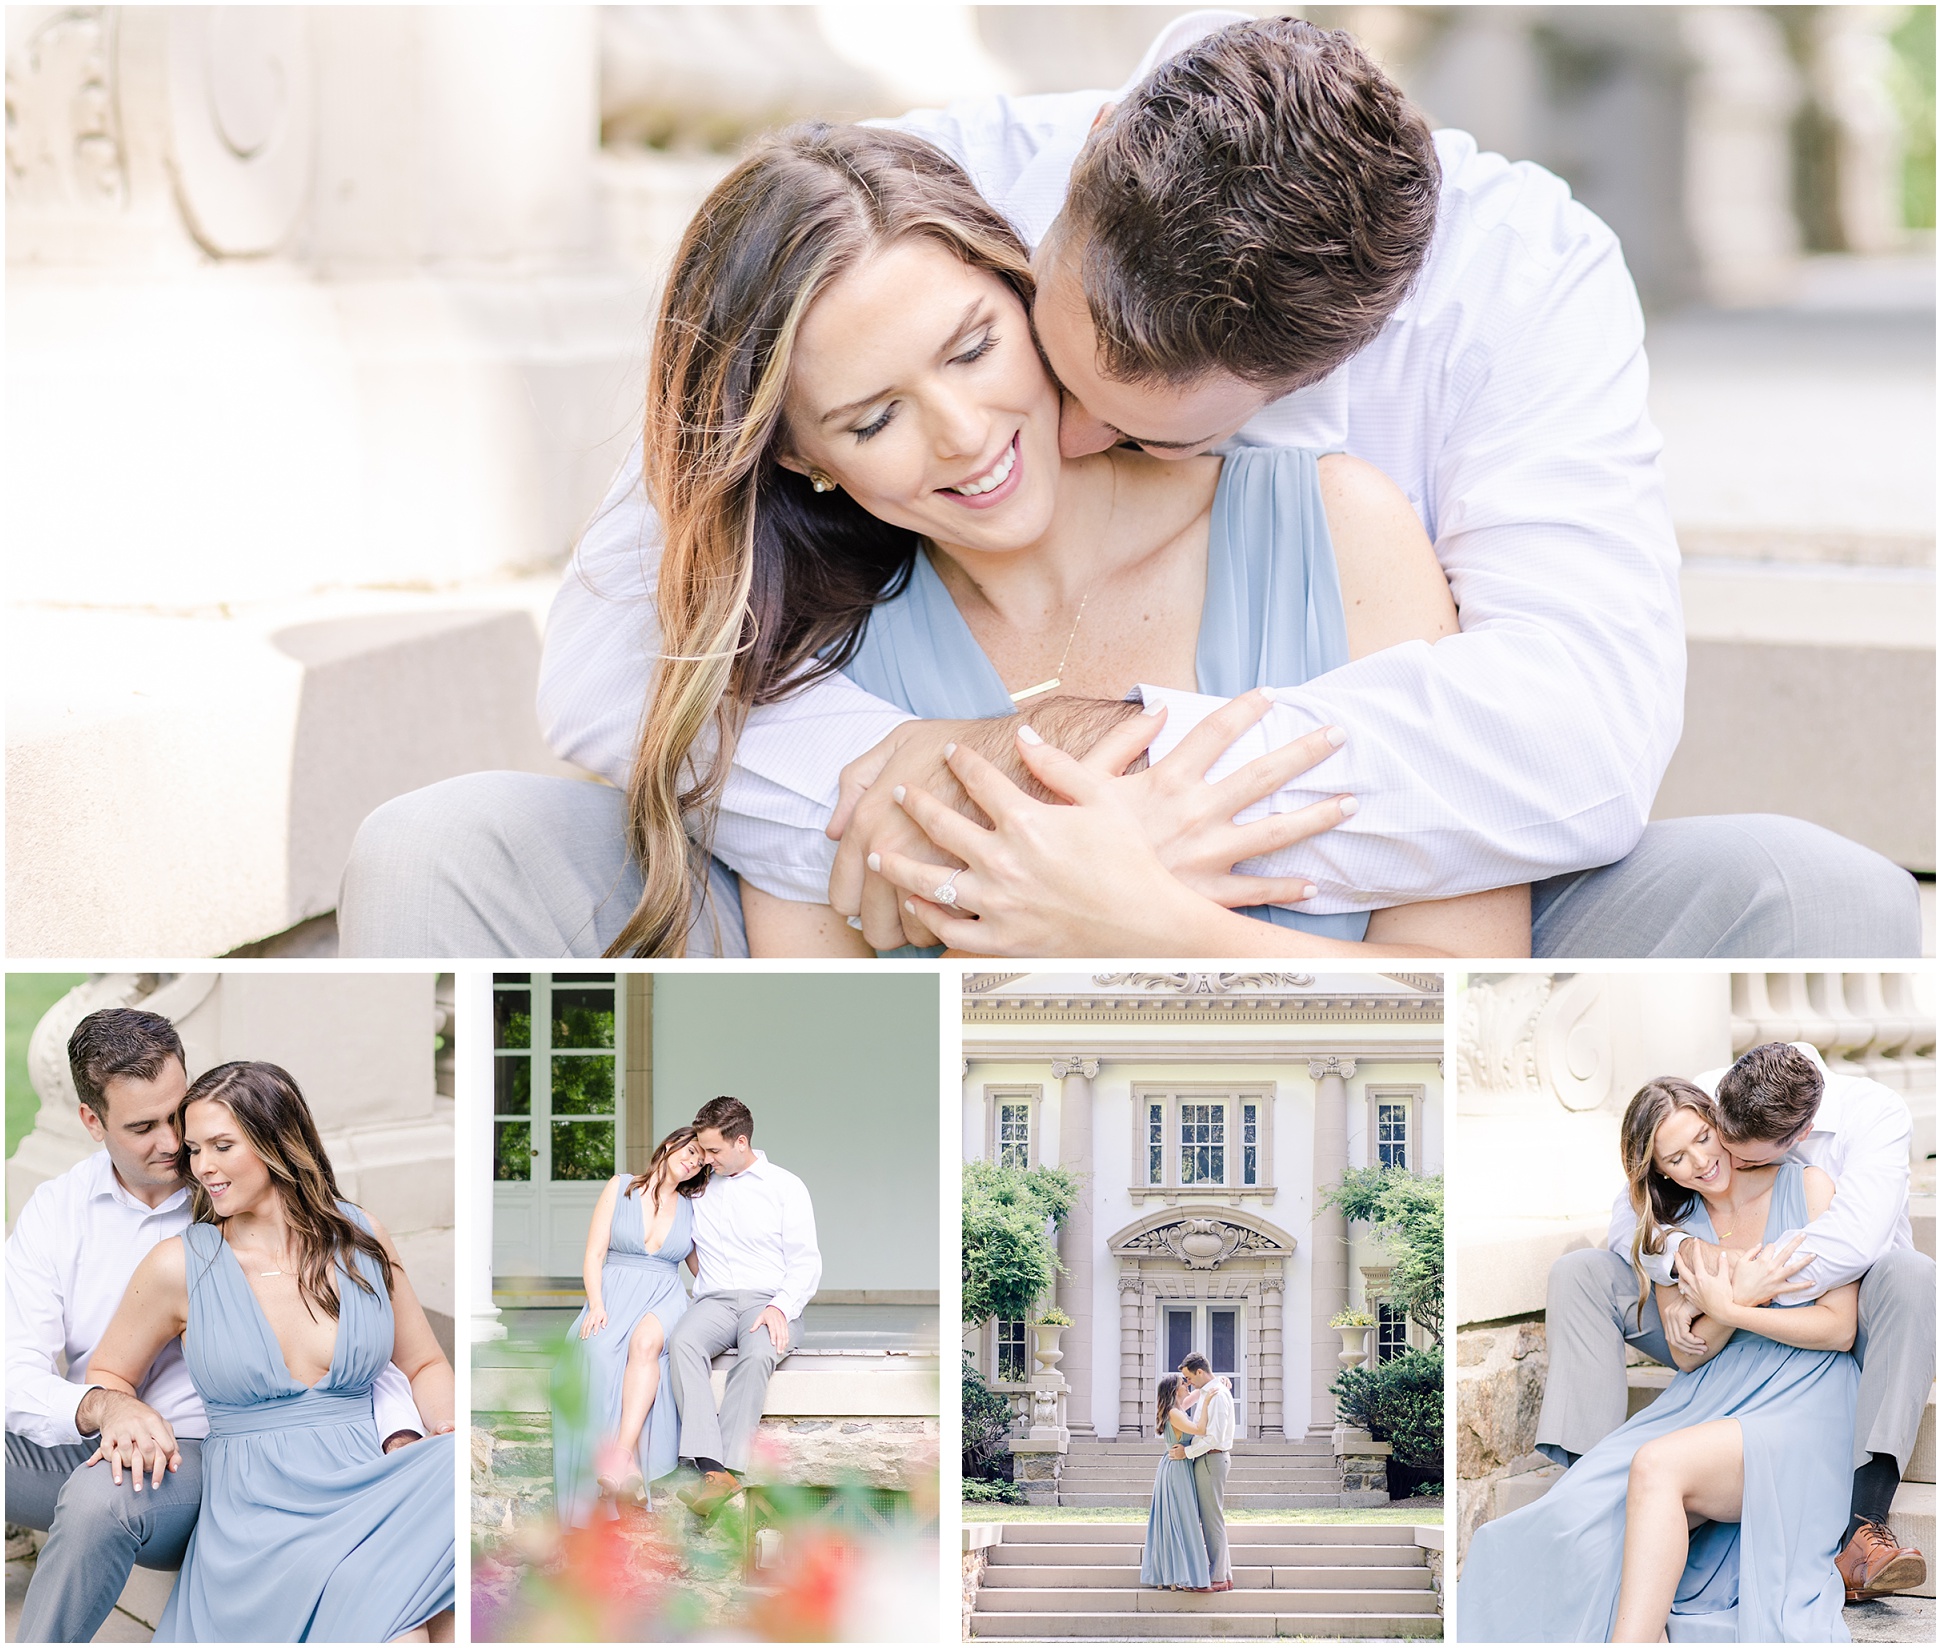 Five Images of Angela and Jeff from their Engagement Session